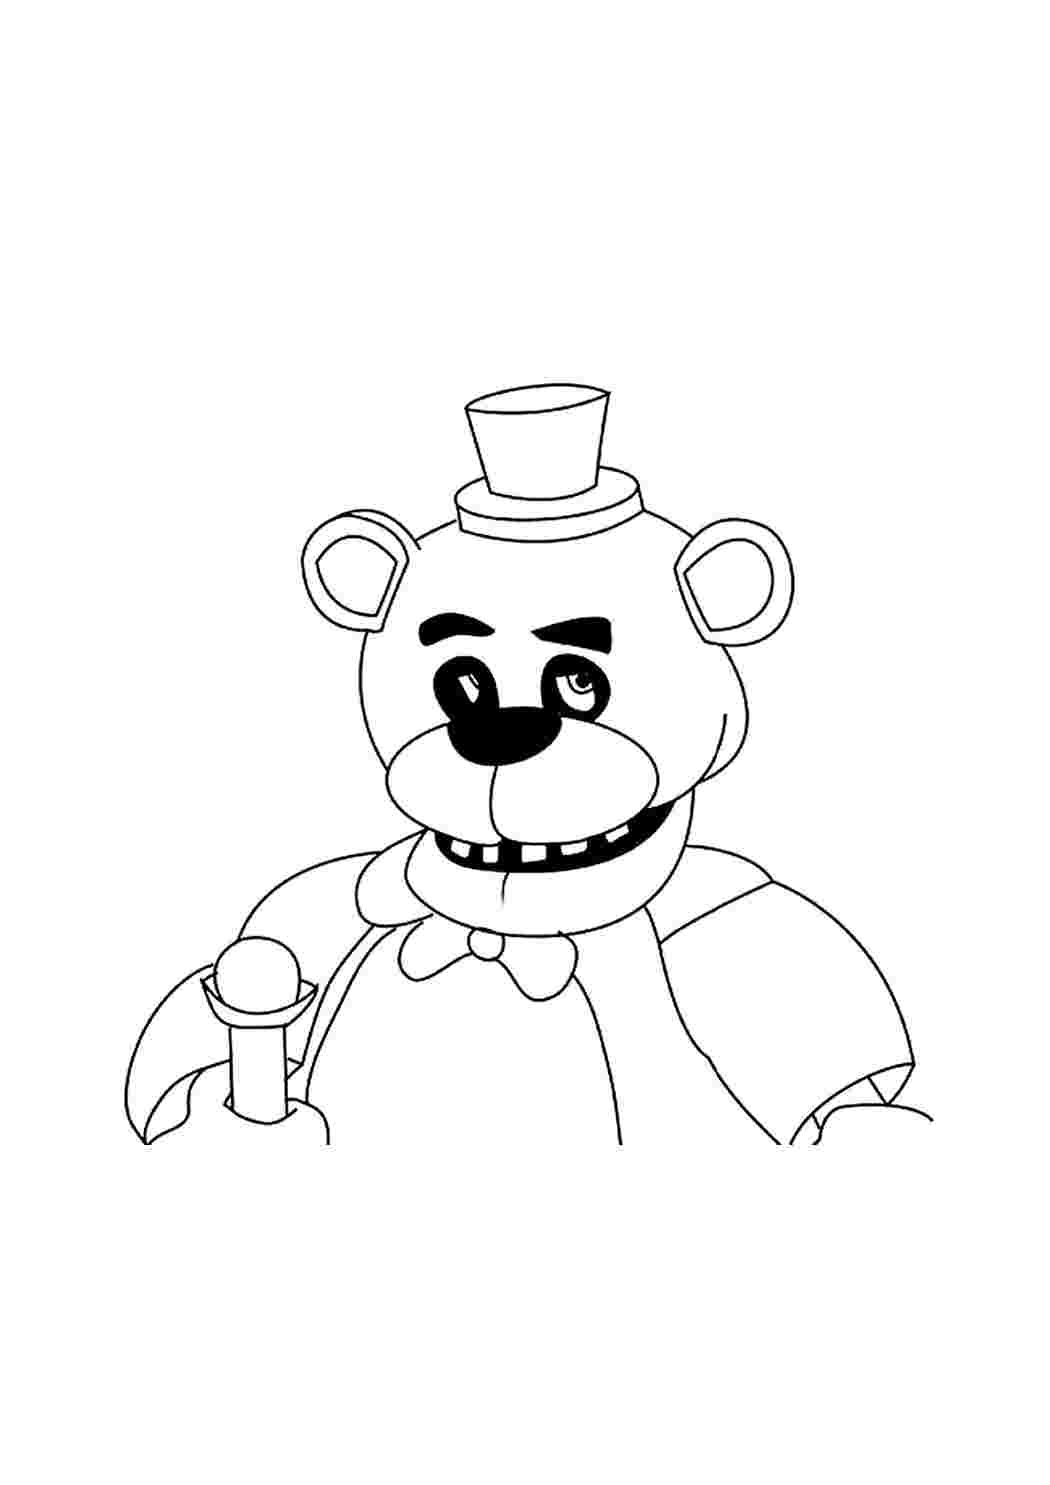 Five Nights at Freddy's: The Official Coloring Book | Энциклопедия Five Nights at Freddy's | Fandom